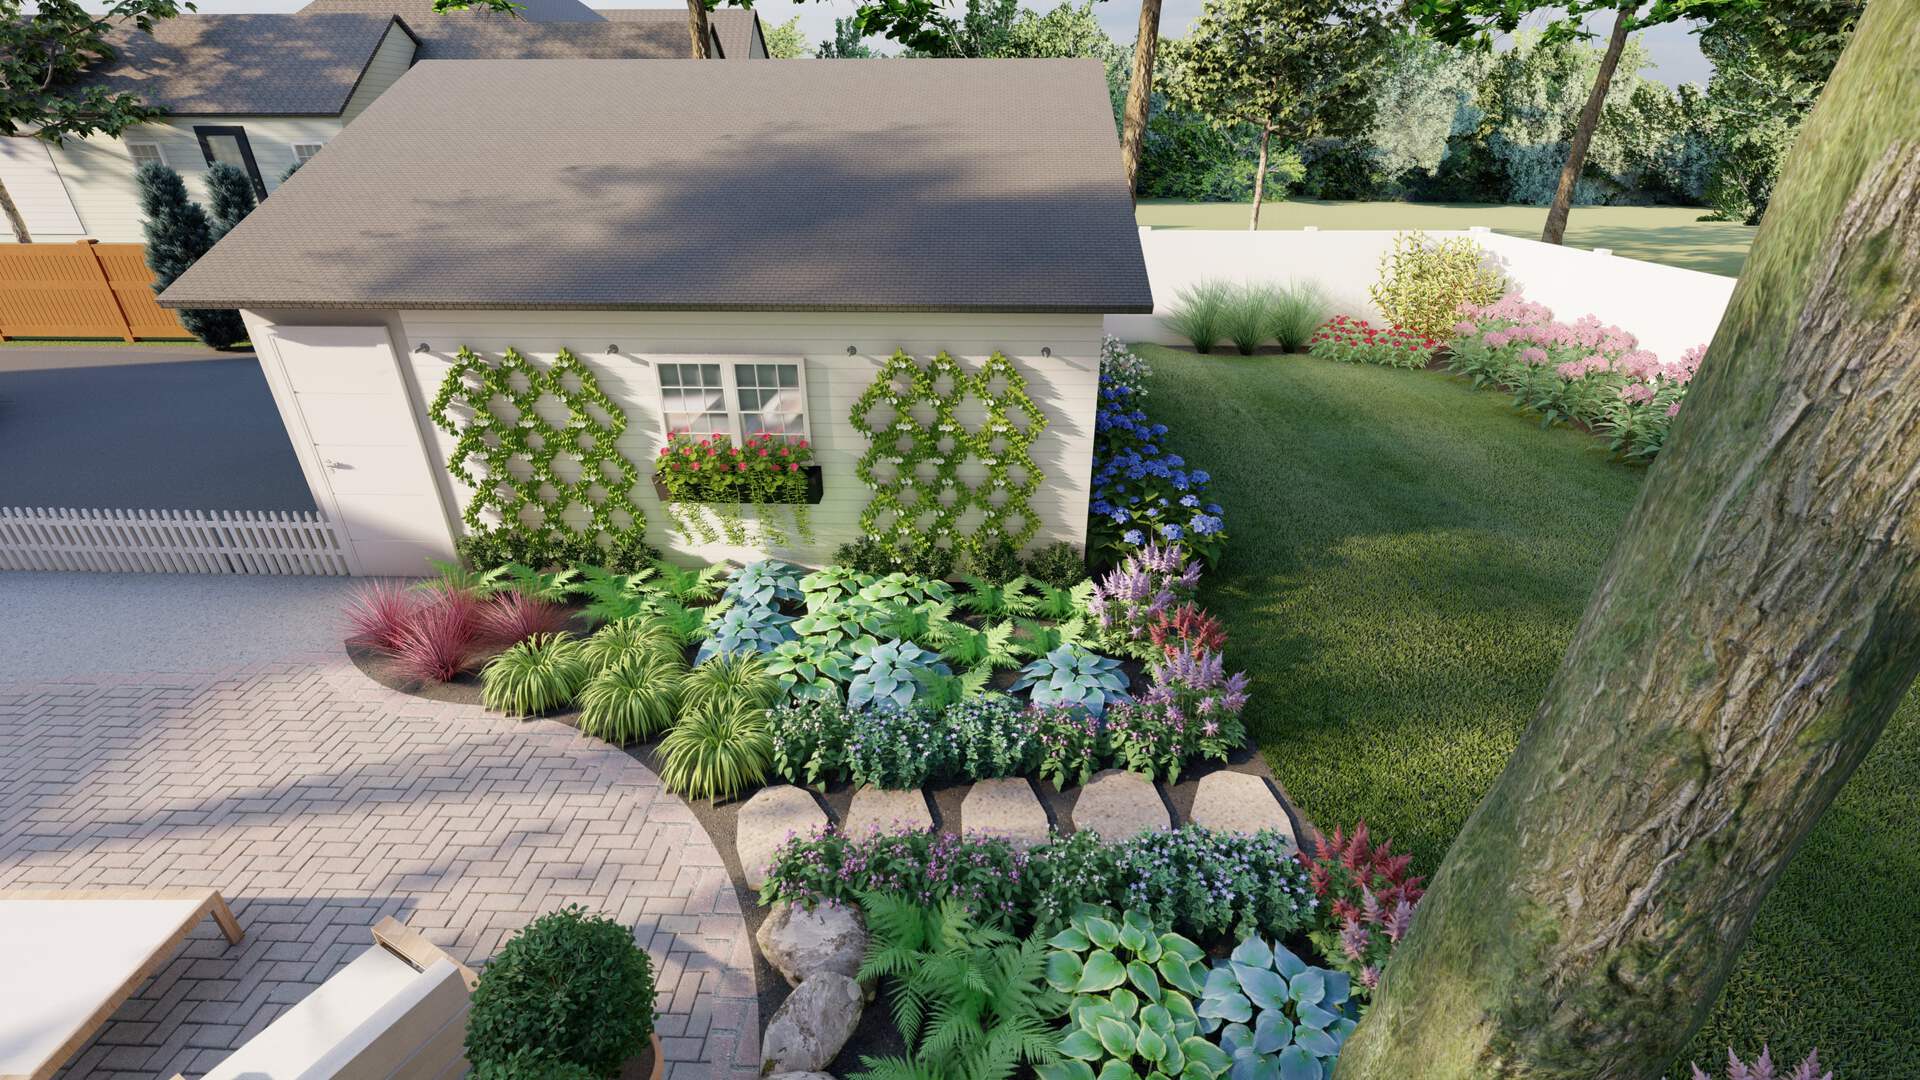 backyard landscaping ideas with lush plants and shrubs and a window box with flowers on the garage